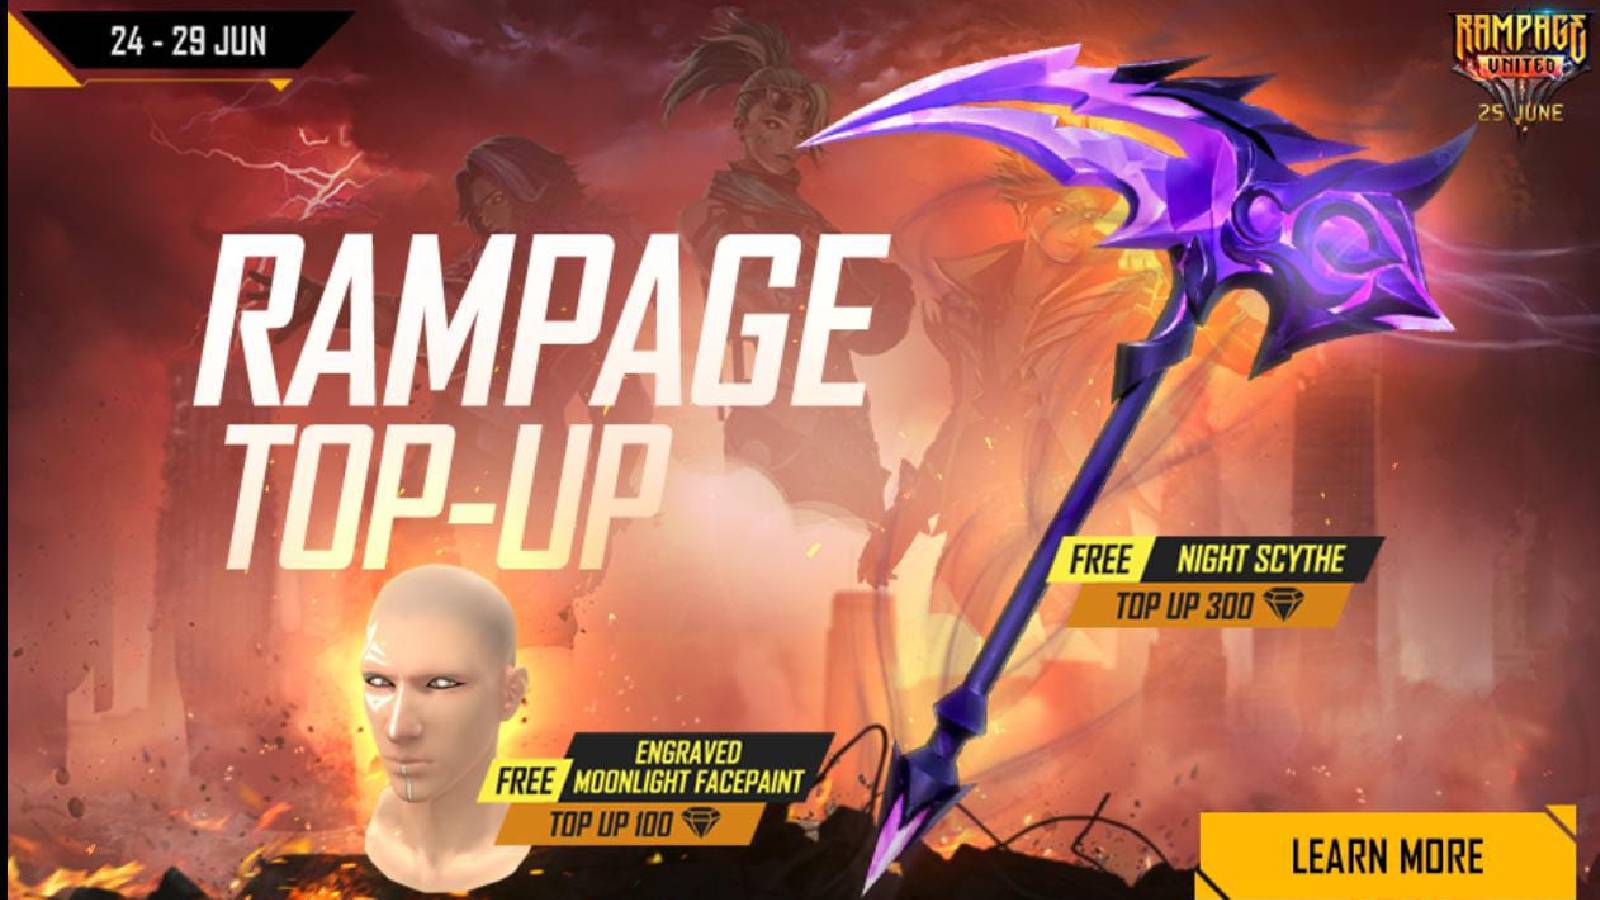 Free Fire Rampage Top-up event